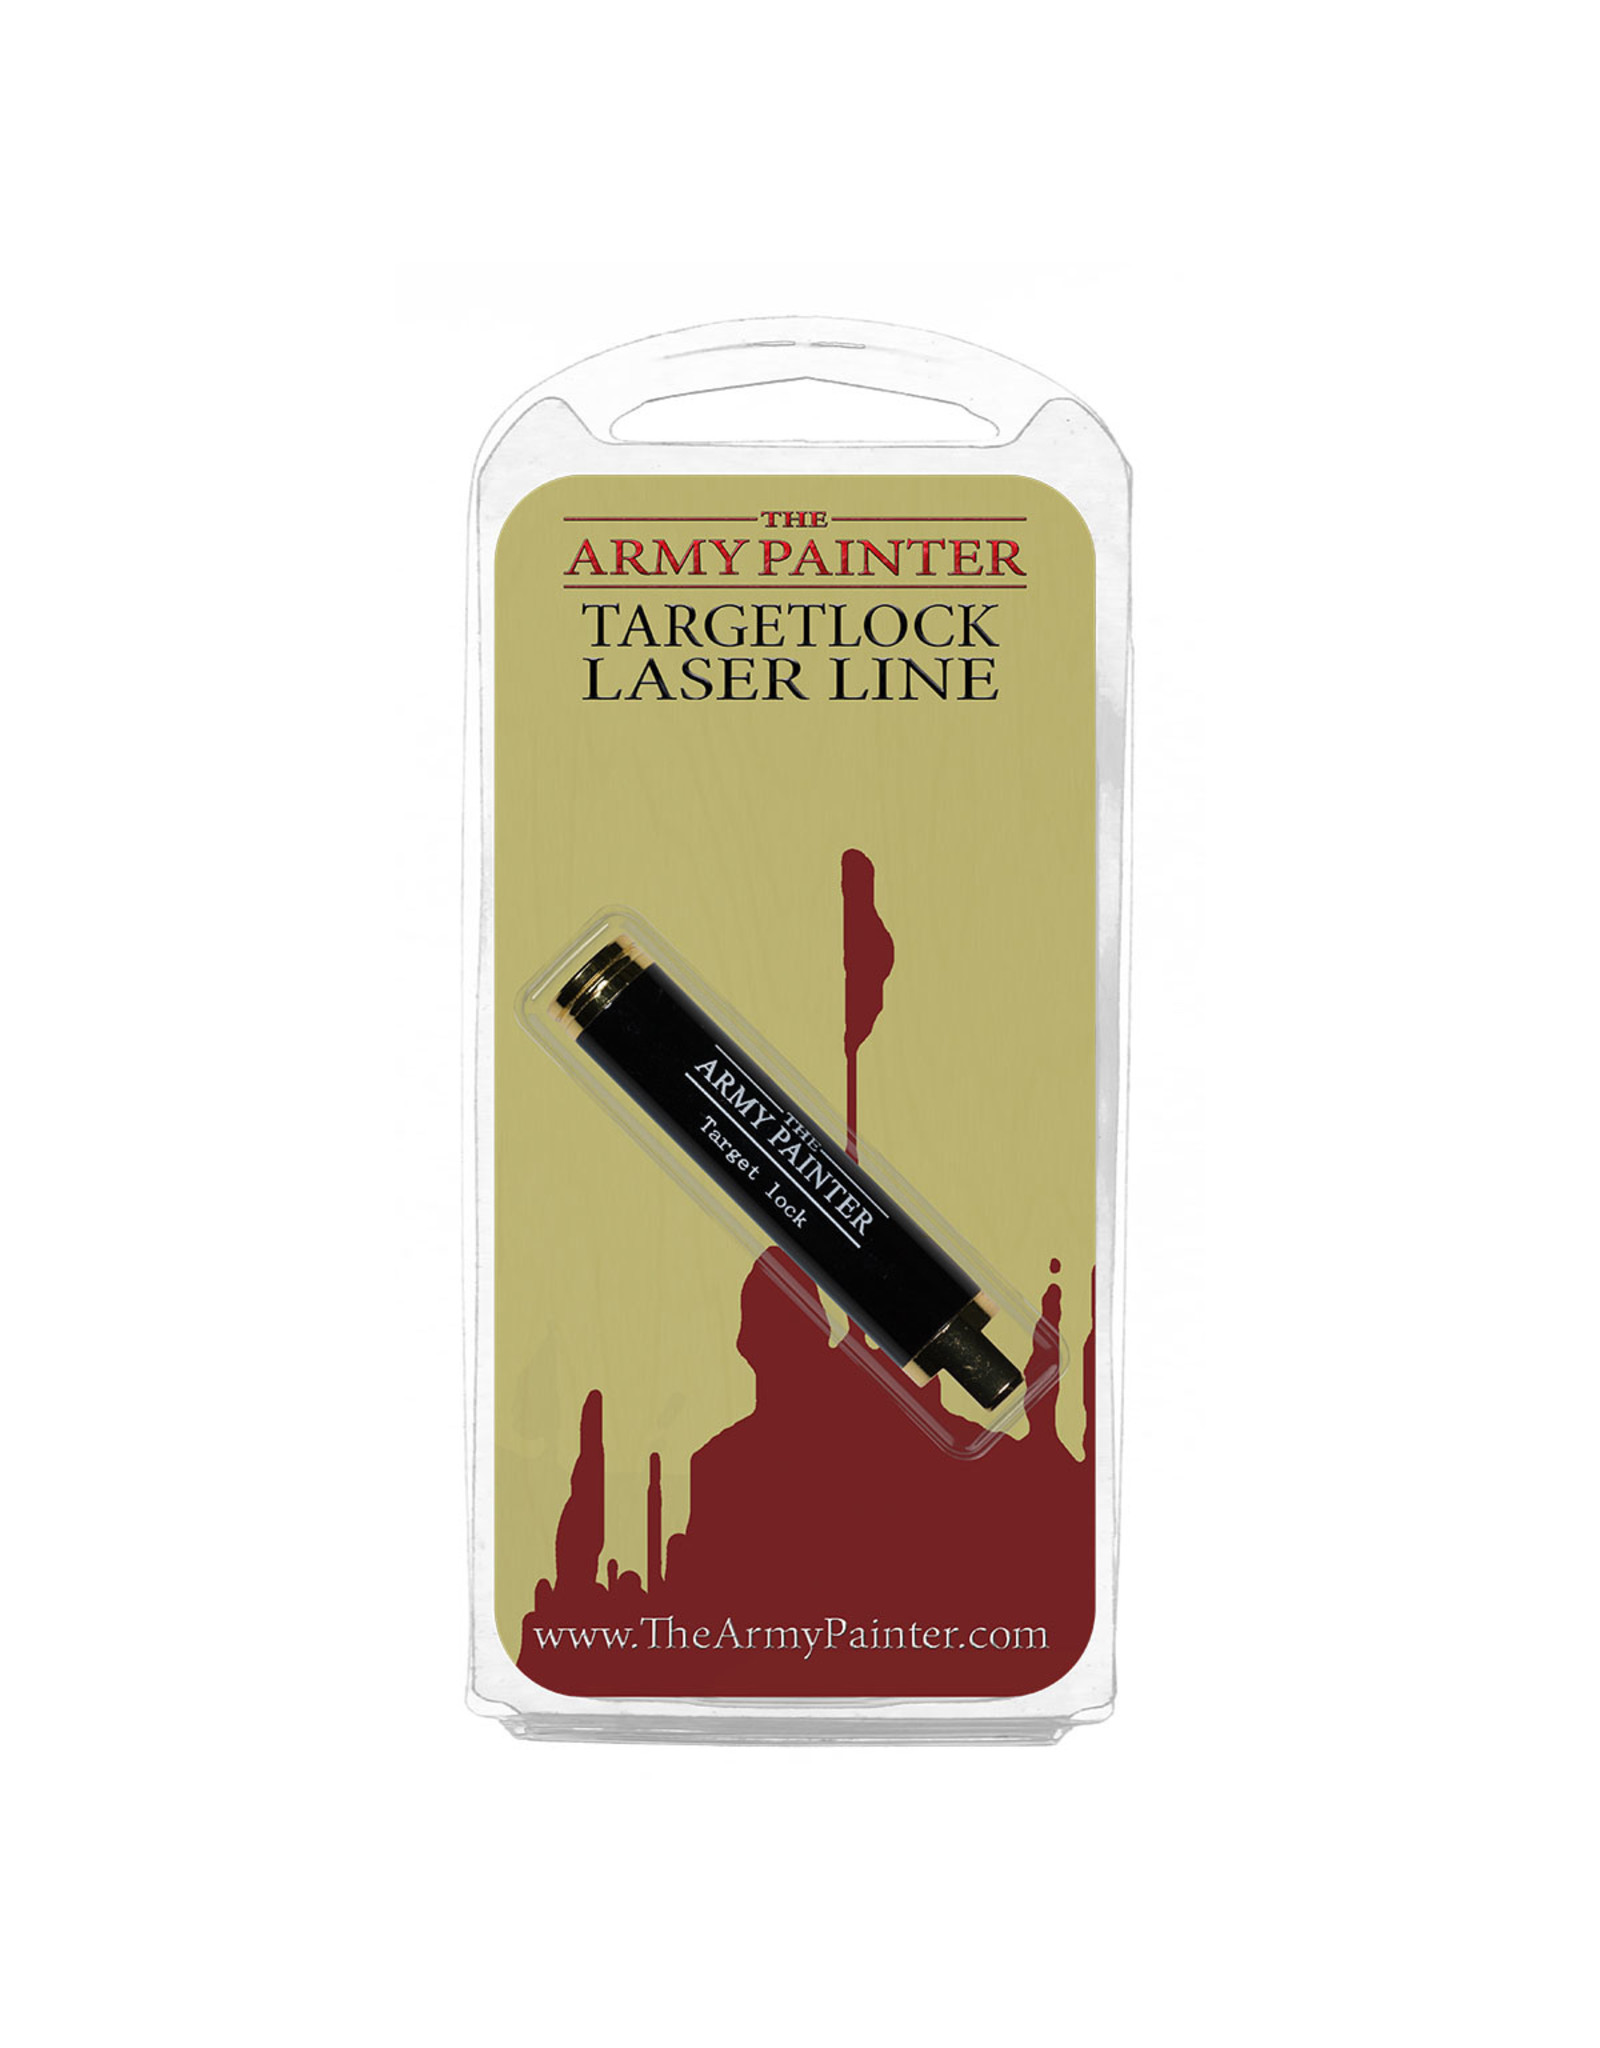 The Army Painter The Army Painter Targetlock Laser Line